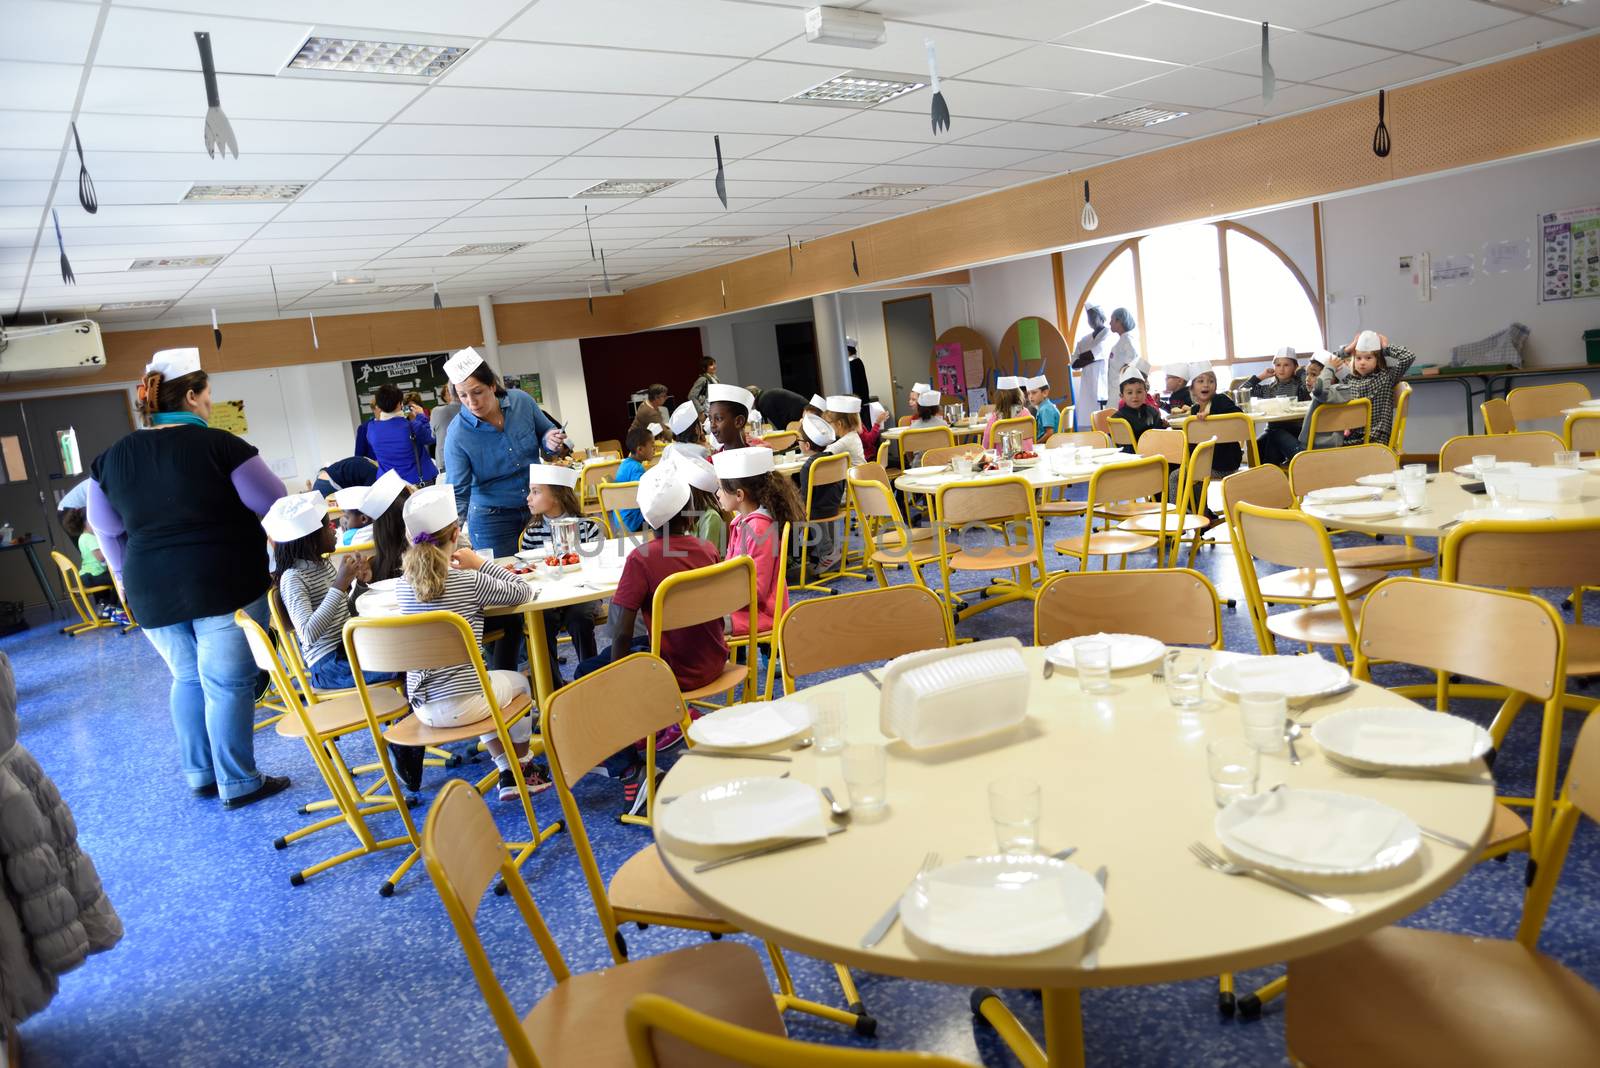 FRANCE, Valence : Pupils sit at canteen tables waiting for their exceptionnal menu at Celestin Freinet school in Valence (Dr�me), on September 25, 2015 on the occasion of French gastronomy days from September 25 to September 27, 2015. 